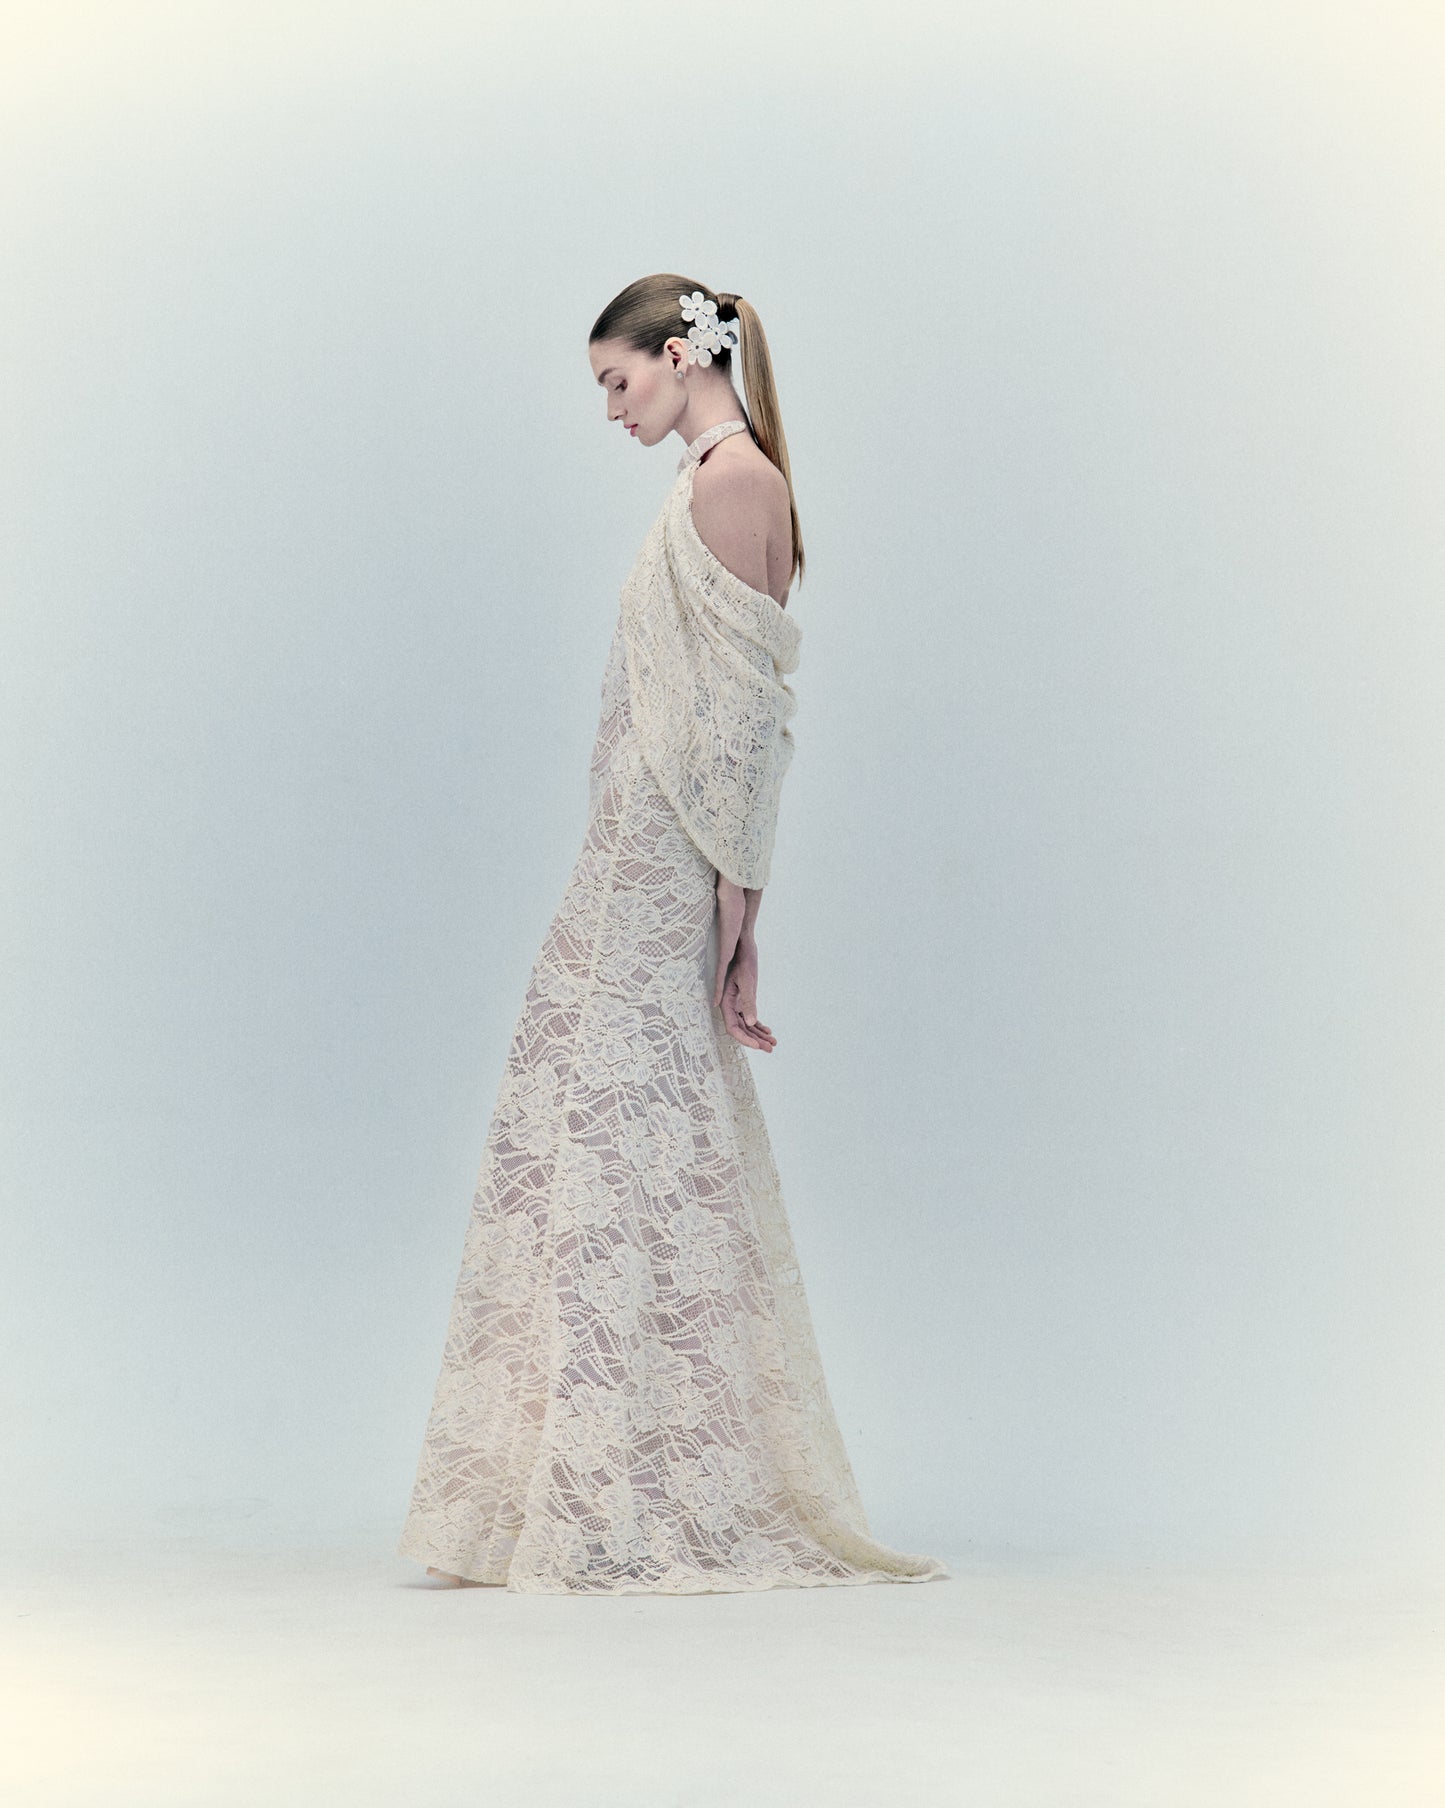 A woman in profile wearing the Rita Dress Beige, long and elegant with lace details, complemented by delicate floral accessories in her hair.